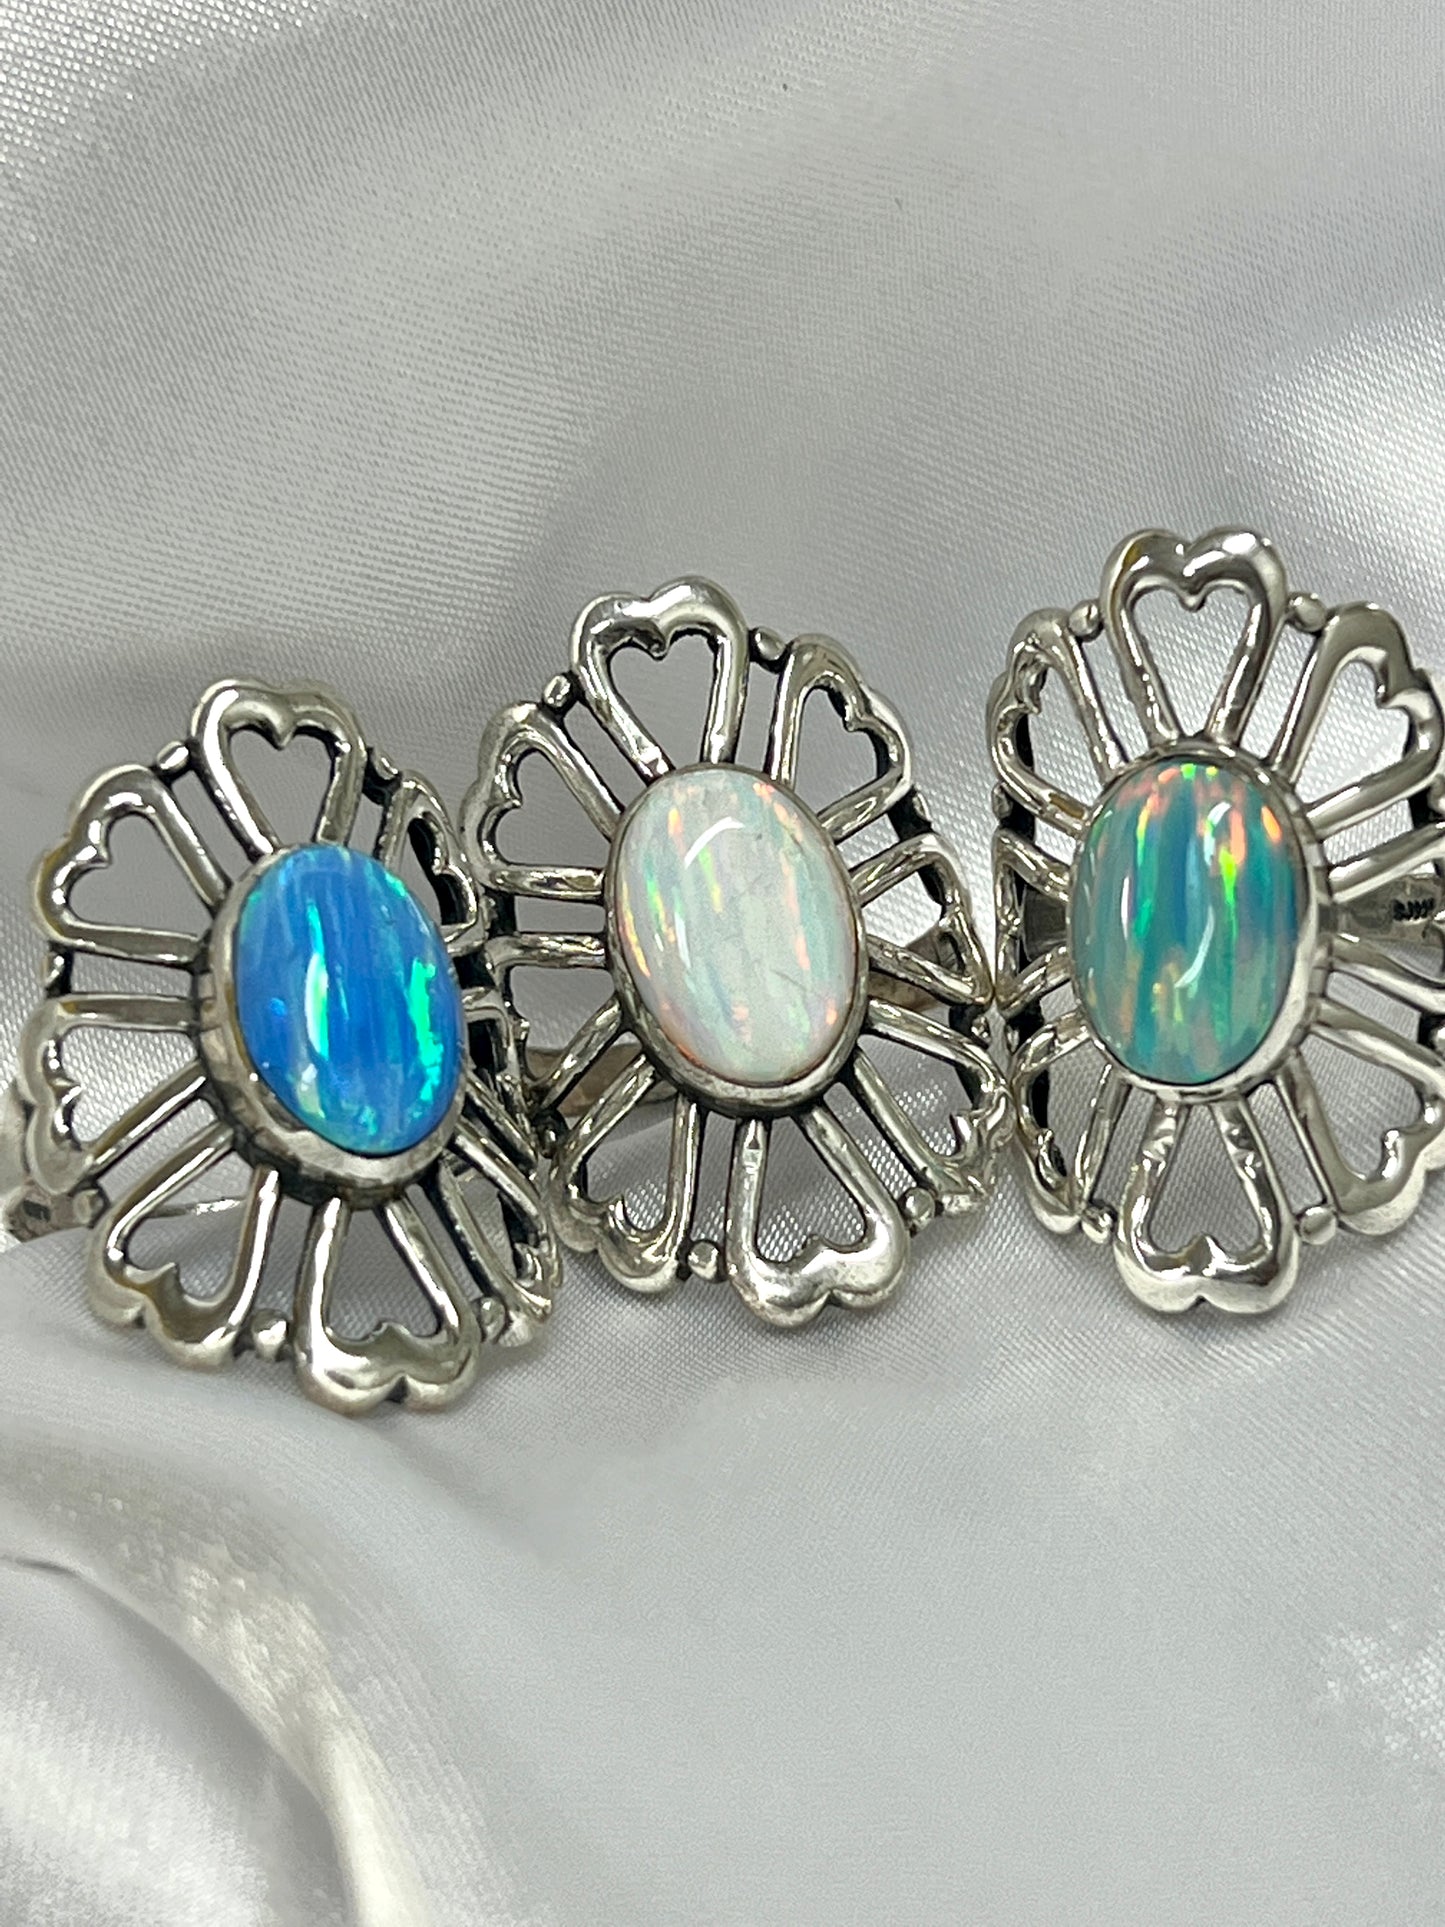 Three American Made Opal Flower Rings with Heart Shaped Petals, handcrafted by Super Silver.